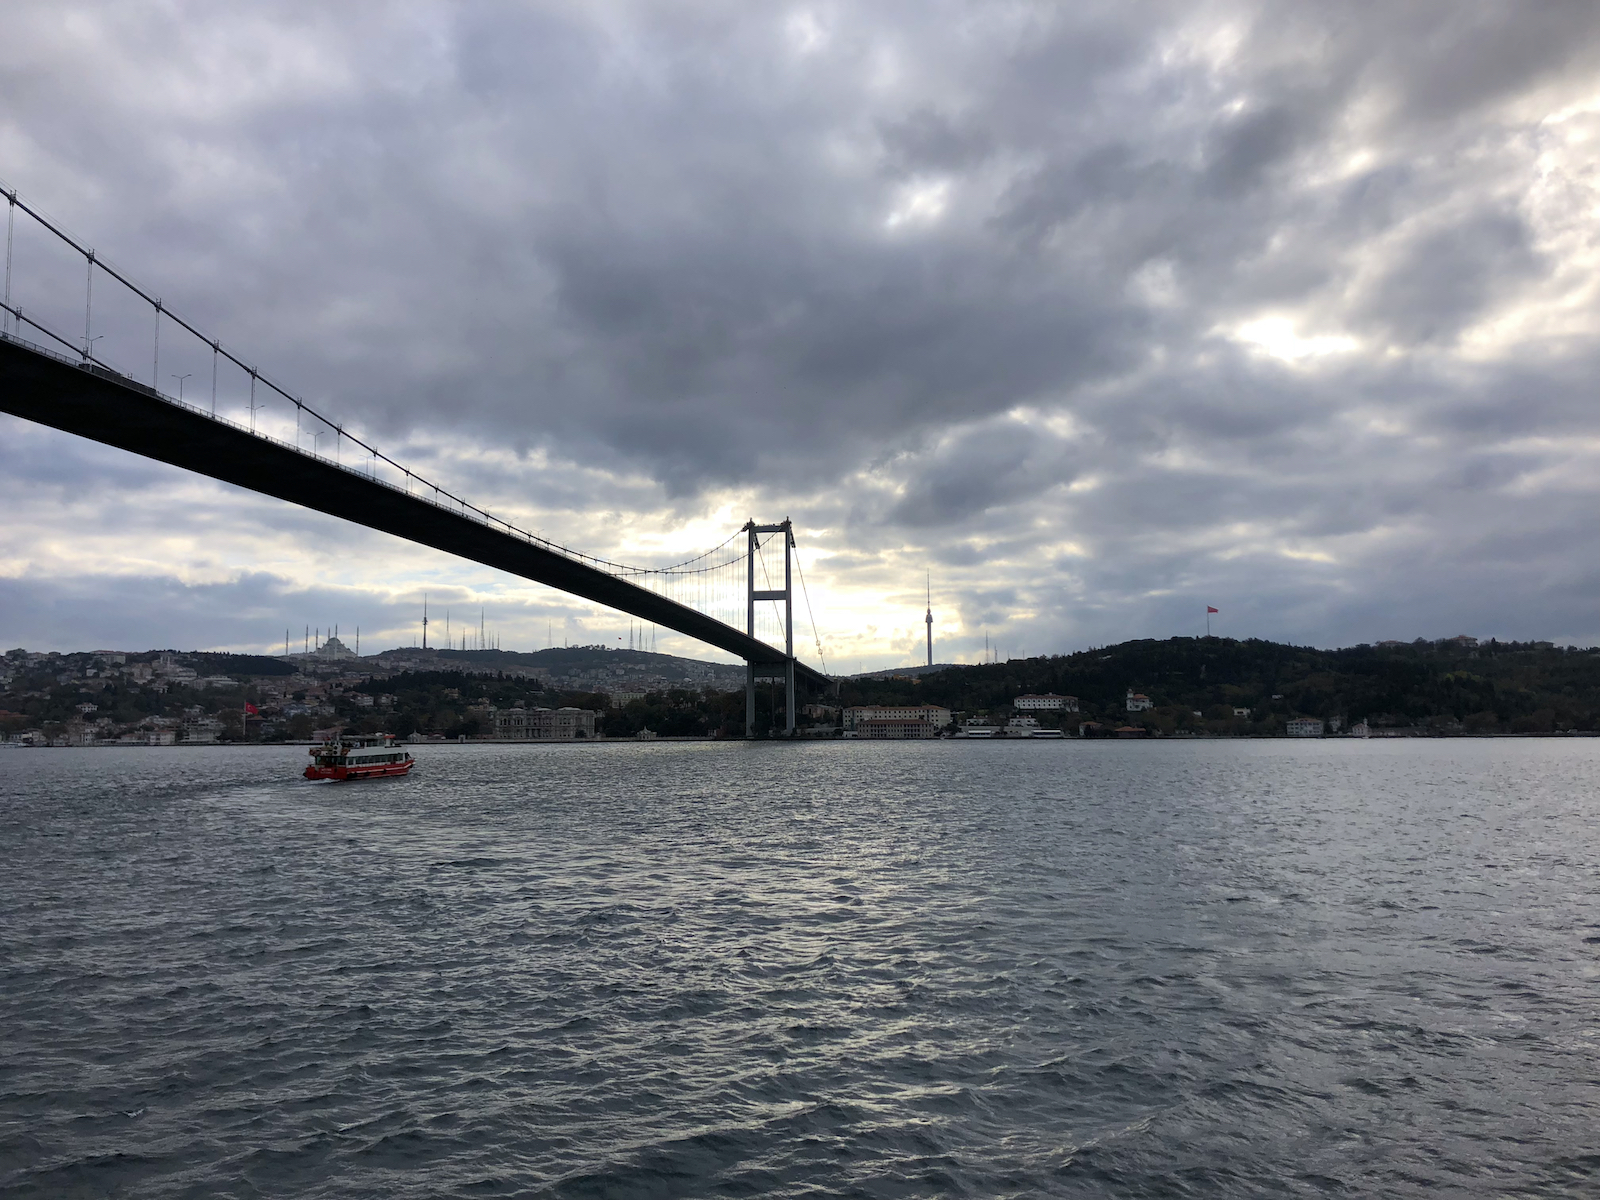 Bosphorus Cruise - Top 11 Things to Do In Istanbul